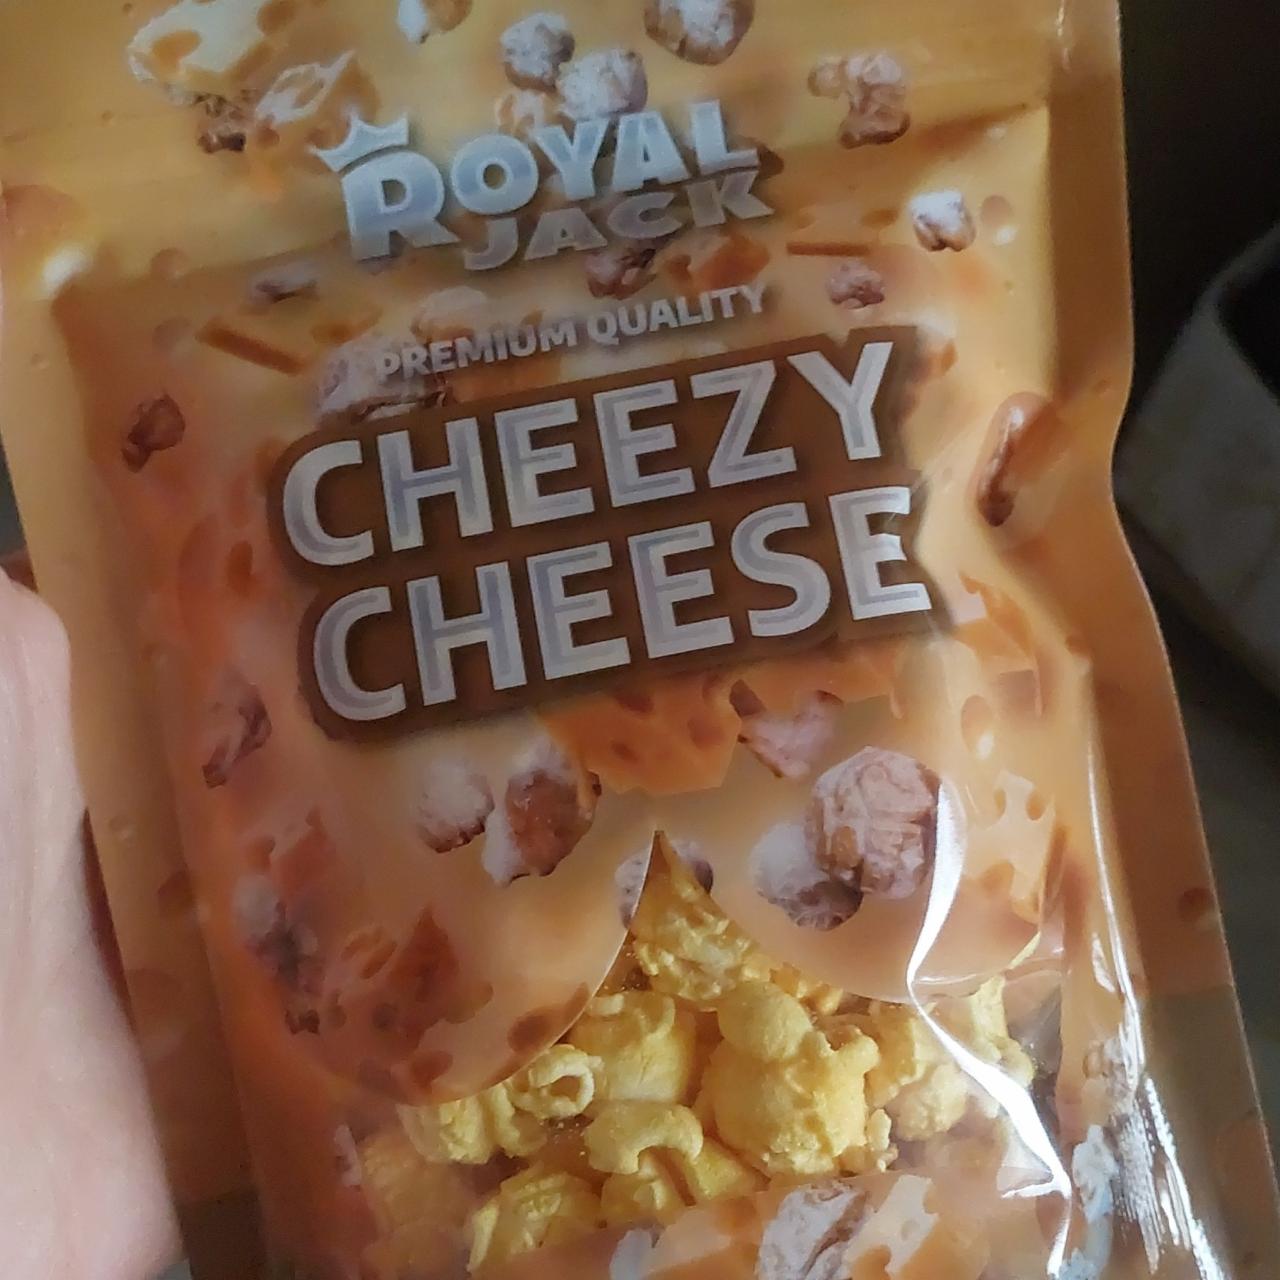 Fotografie - Cheezy Cheese Royal Jack